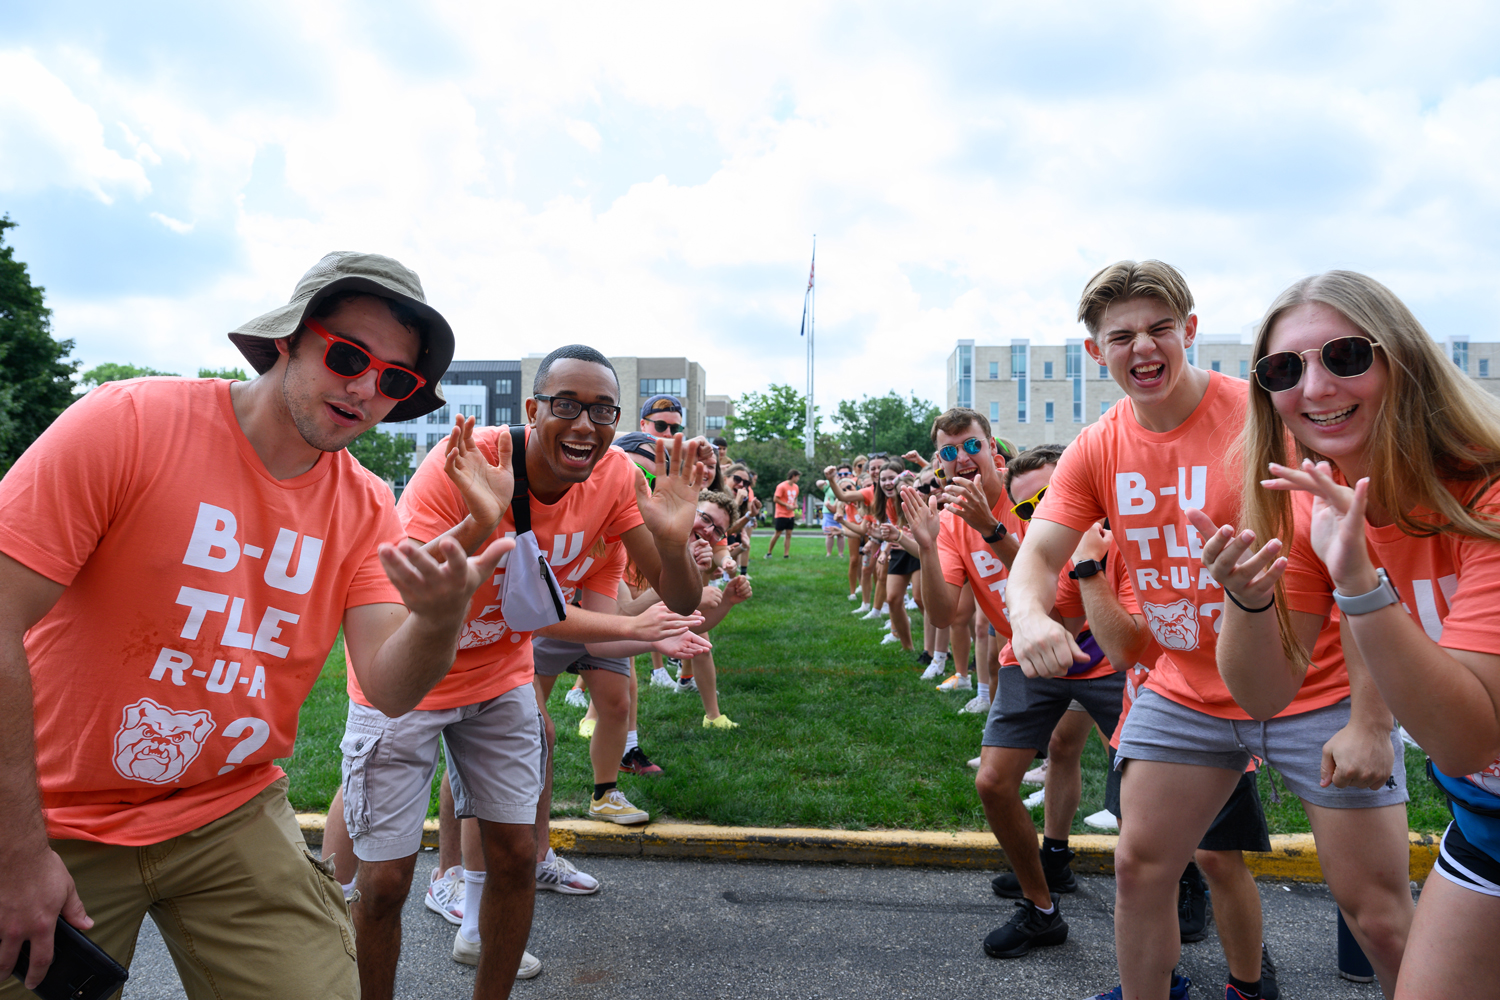 student orientation guides in matching orange shirts forming a tunnel for new students to run through